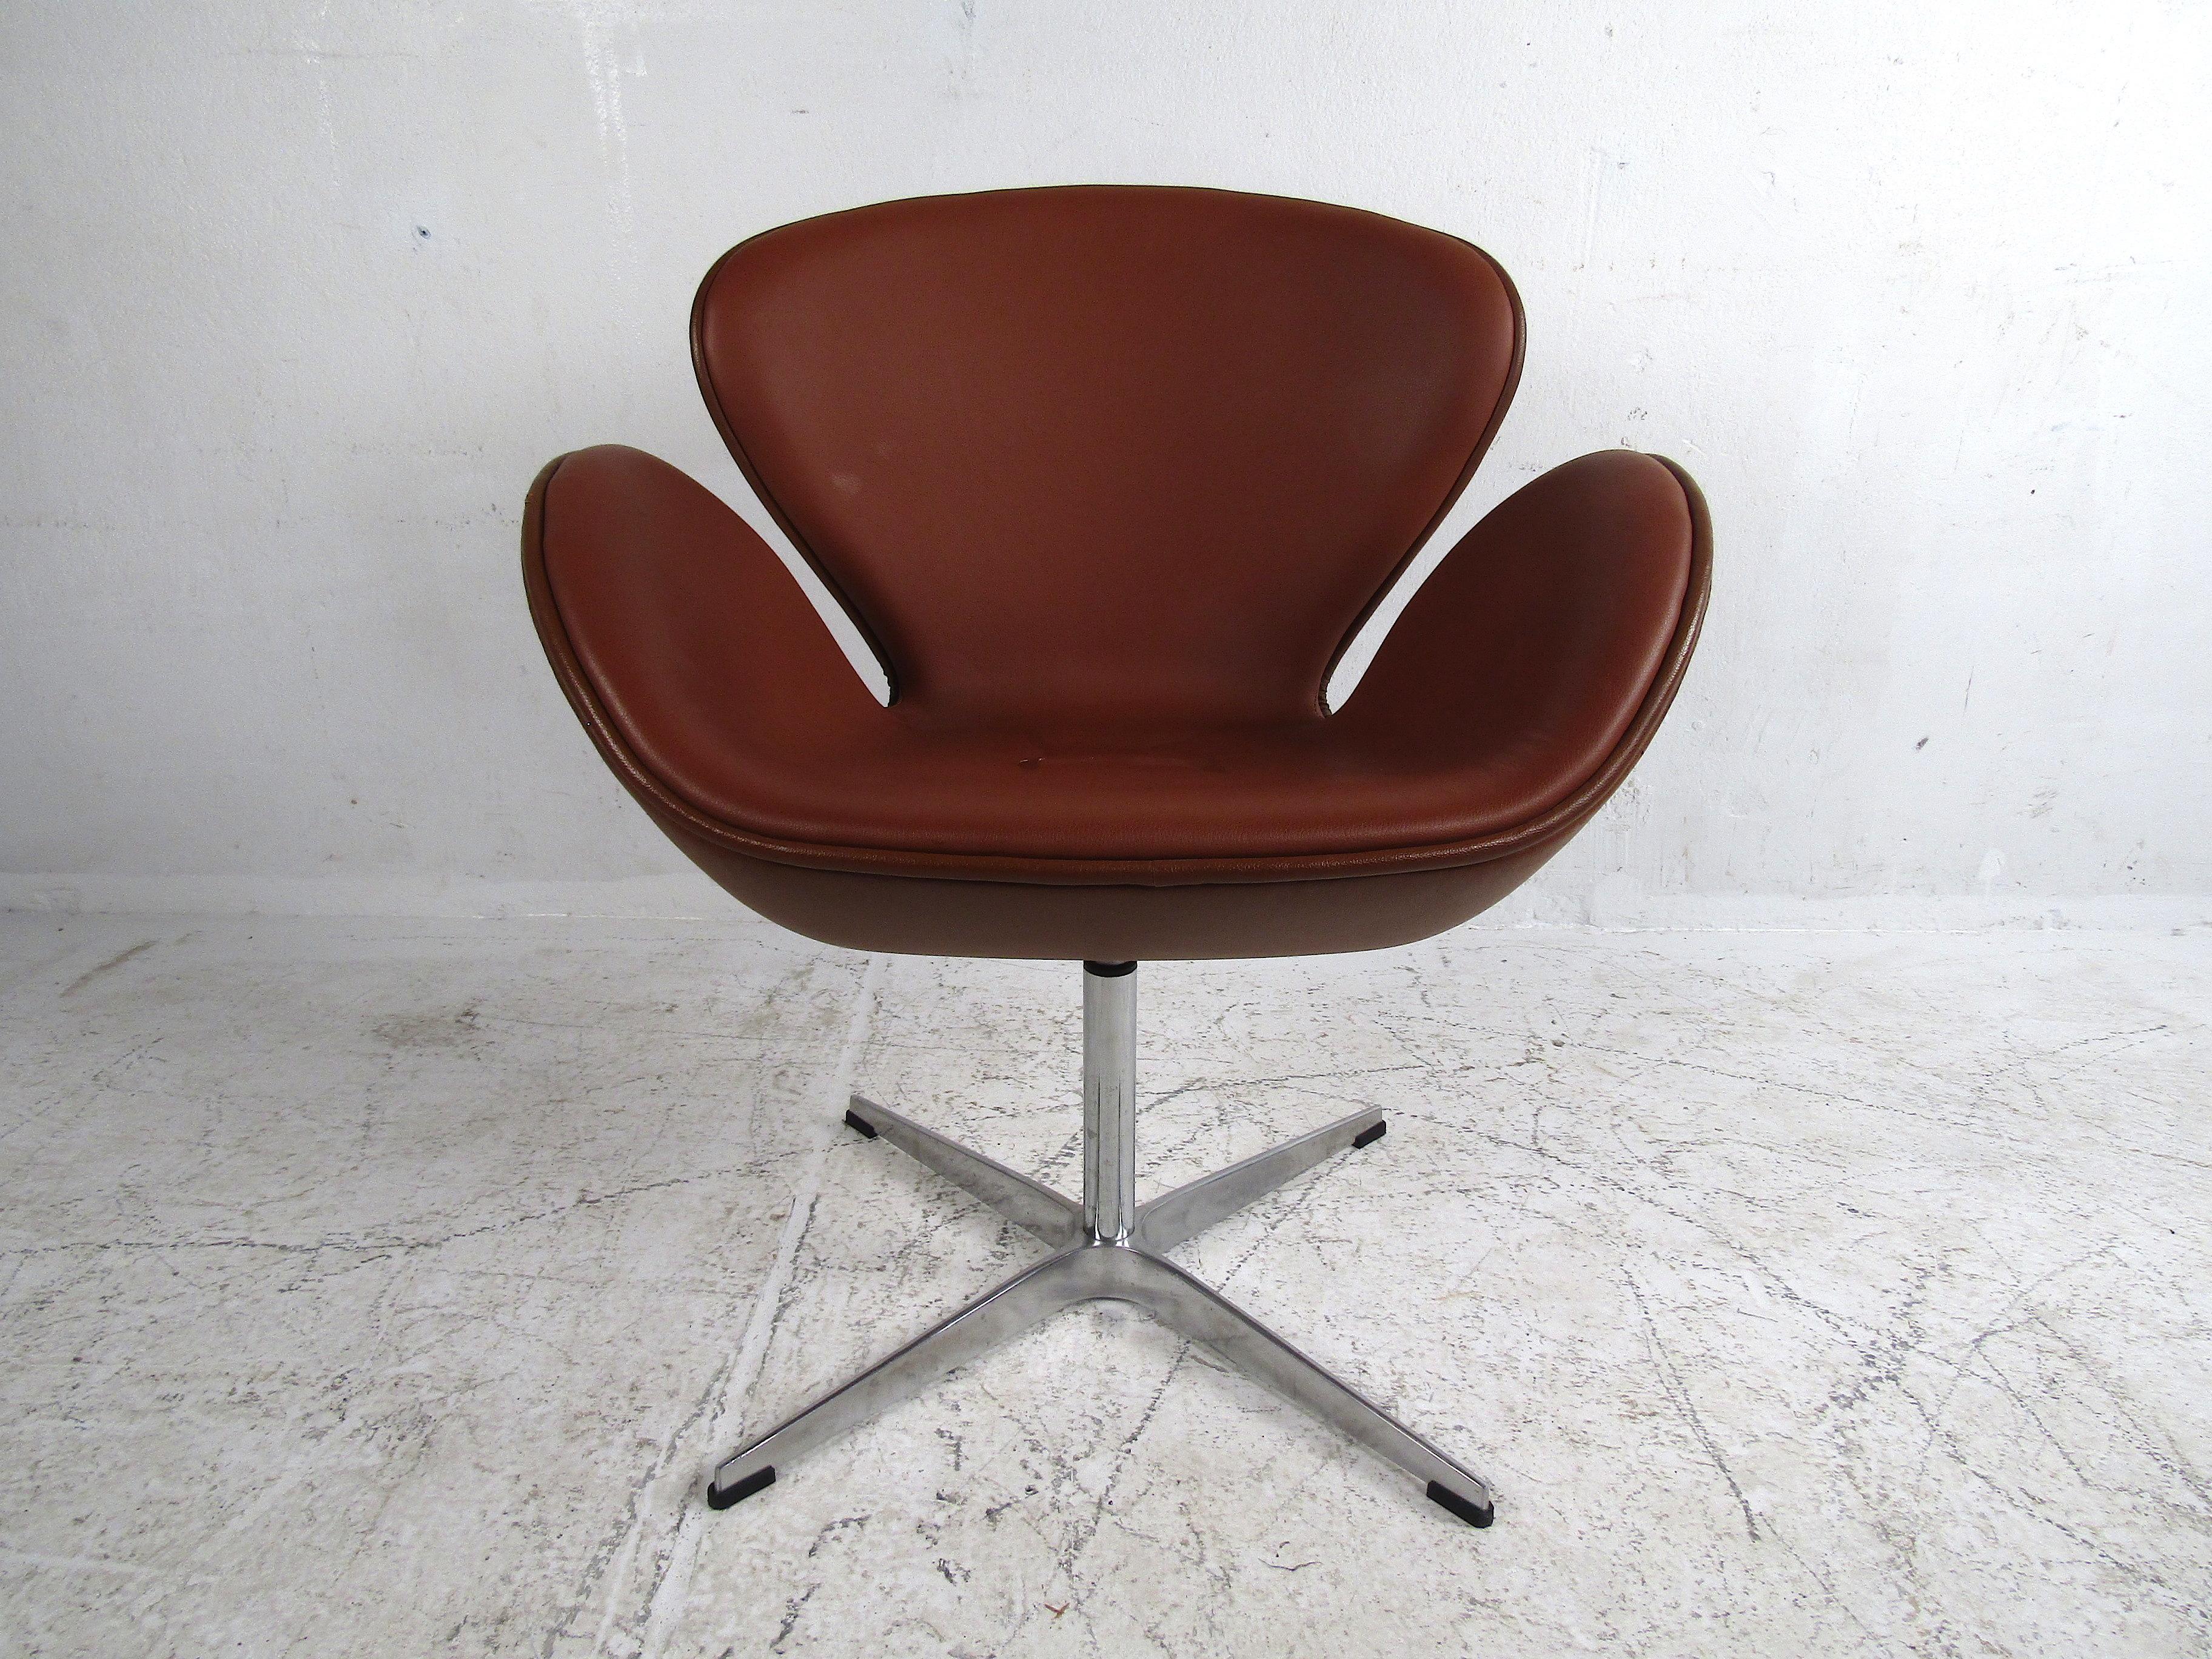 Stylish midcentury swiveling chair styled after Arne Jacobsen's 